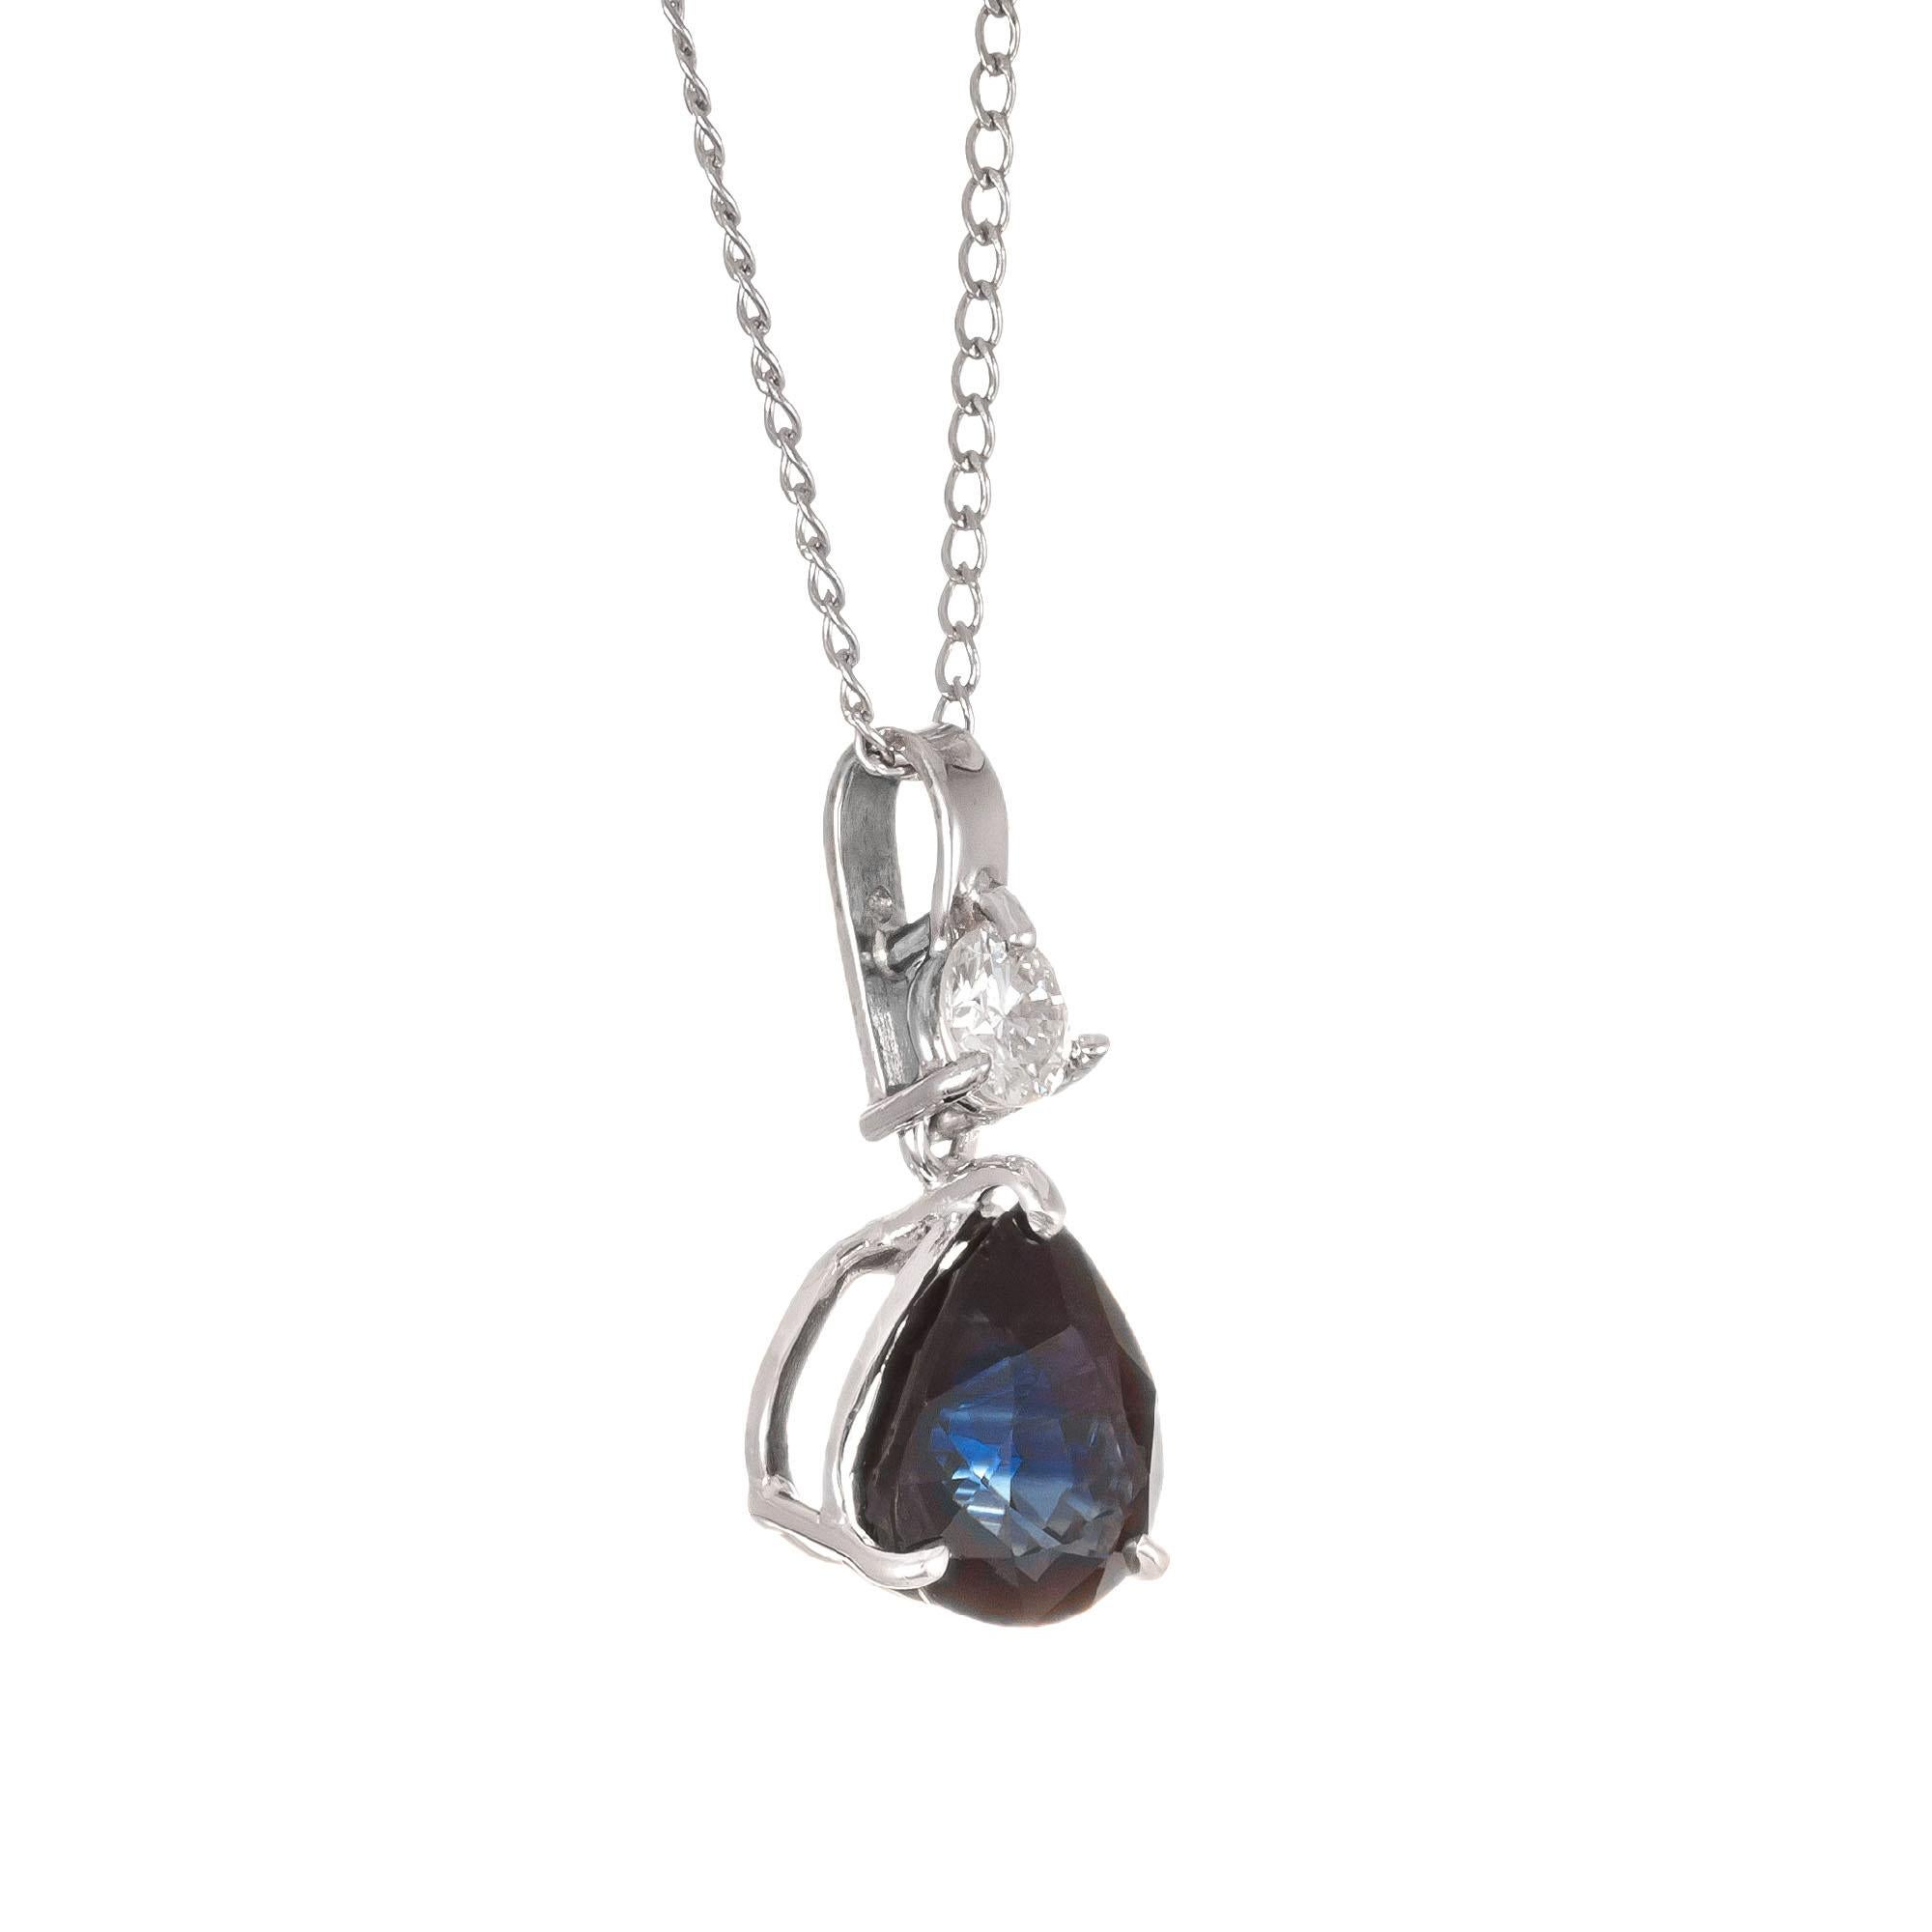 Peter Suchy dark blue pear shaped 2.79 carat sapphire and diamond pendant necklace. GIA certified sapphire in 14 white gold, with a round accent diamond.  

1 pear shaped dark blue sapphire SI, approx. 2.79cts GIA Certificate 2185476052
1 round